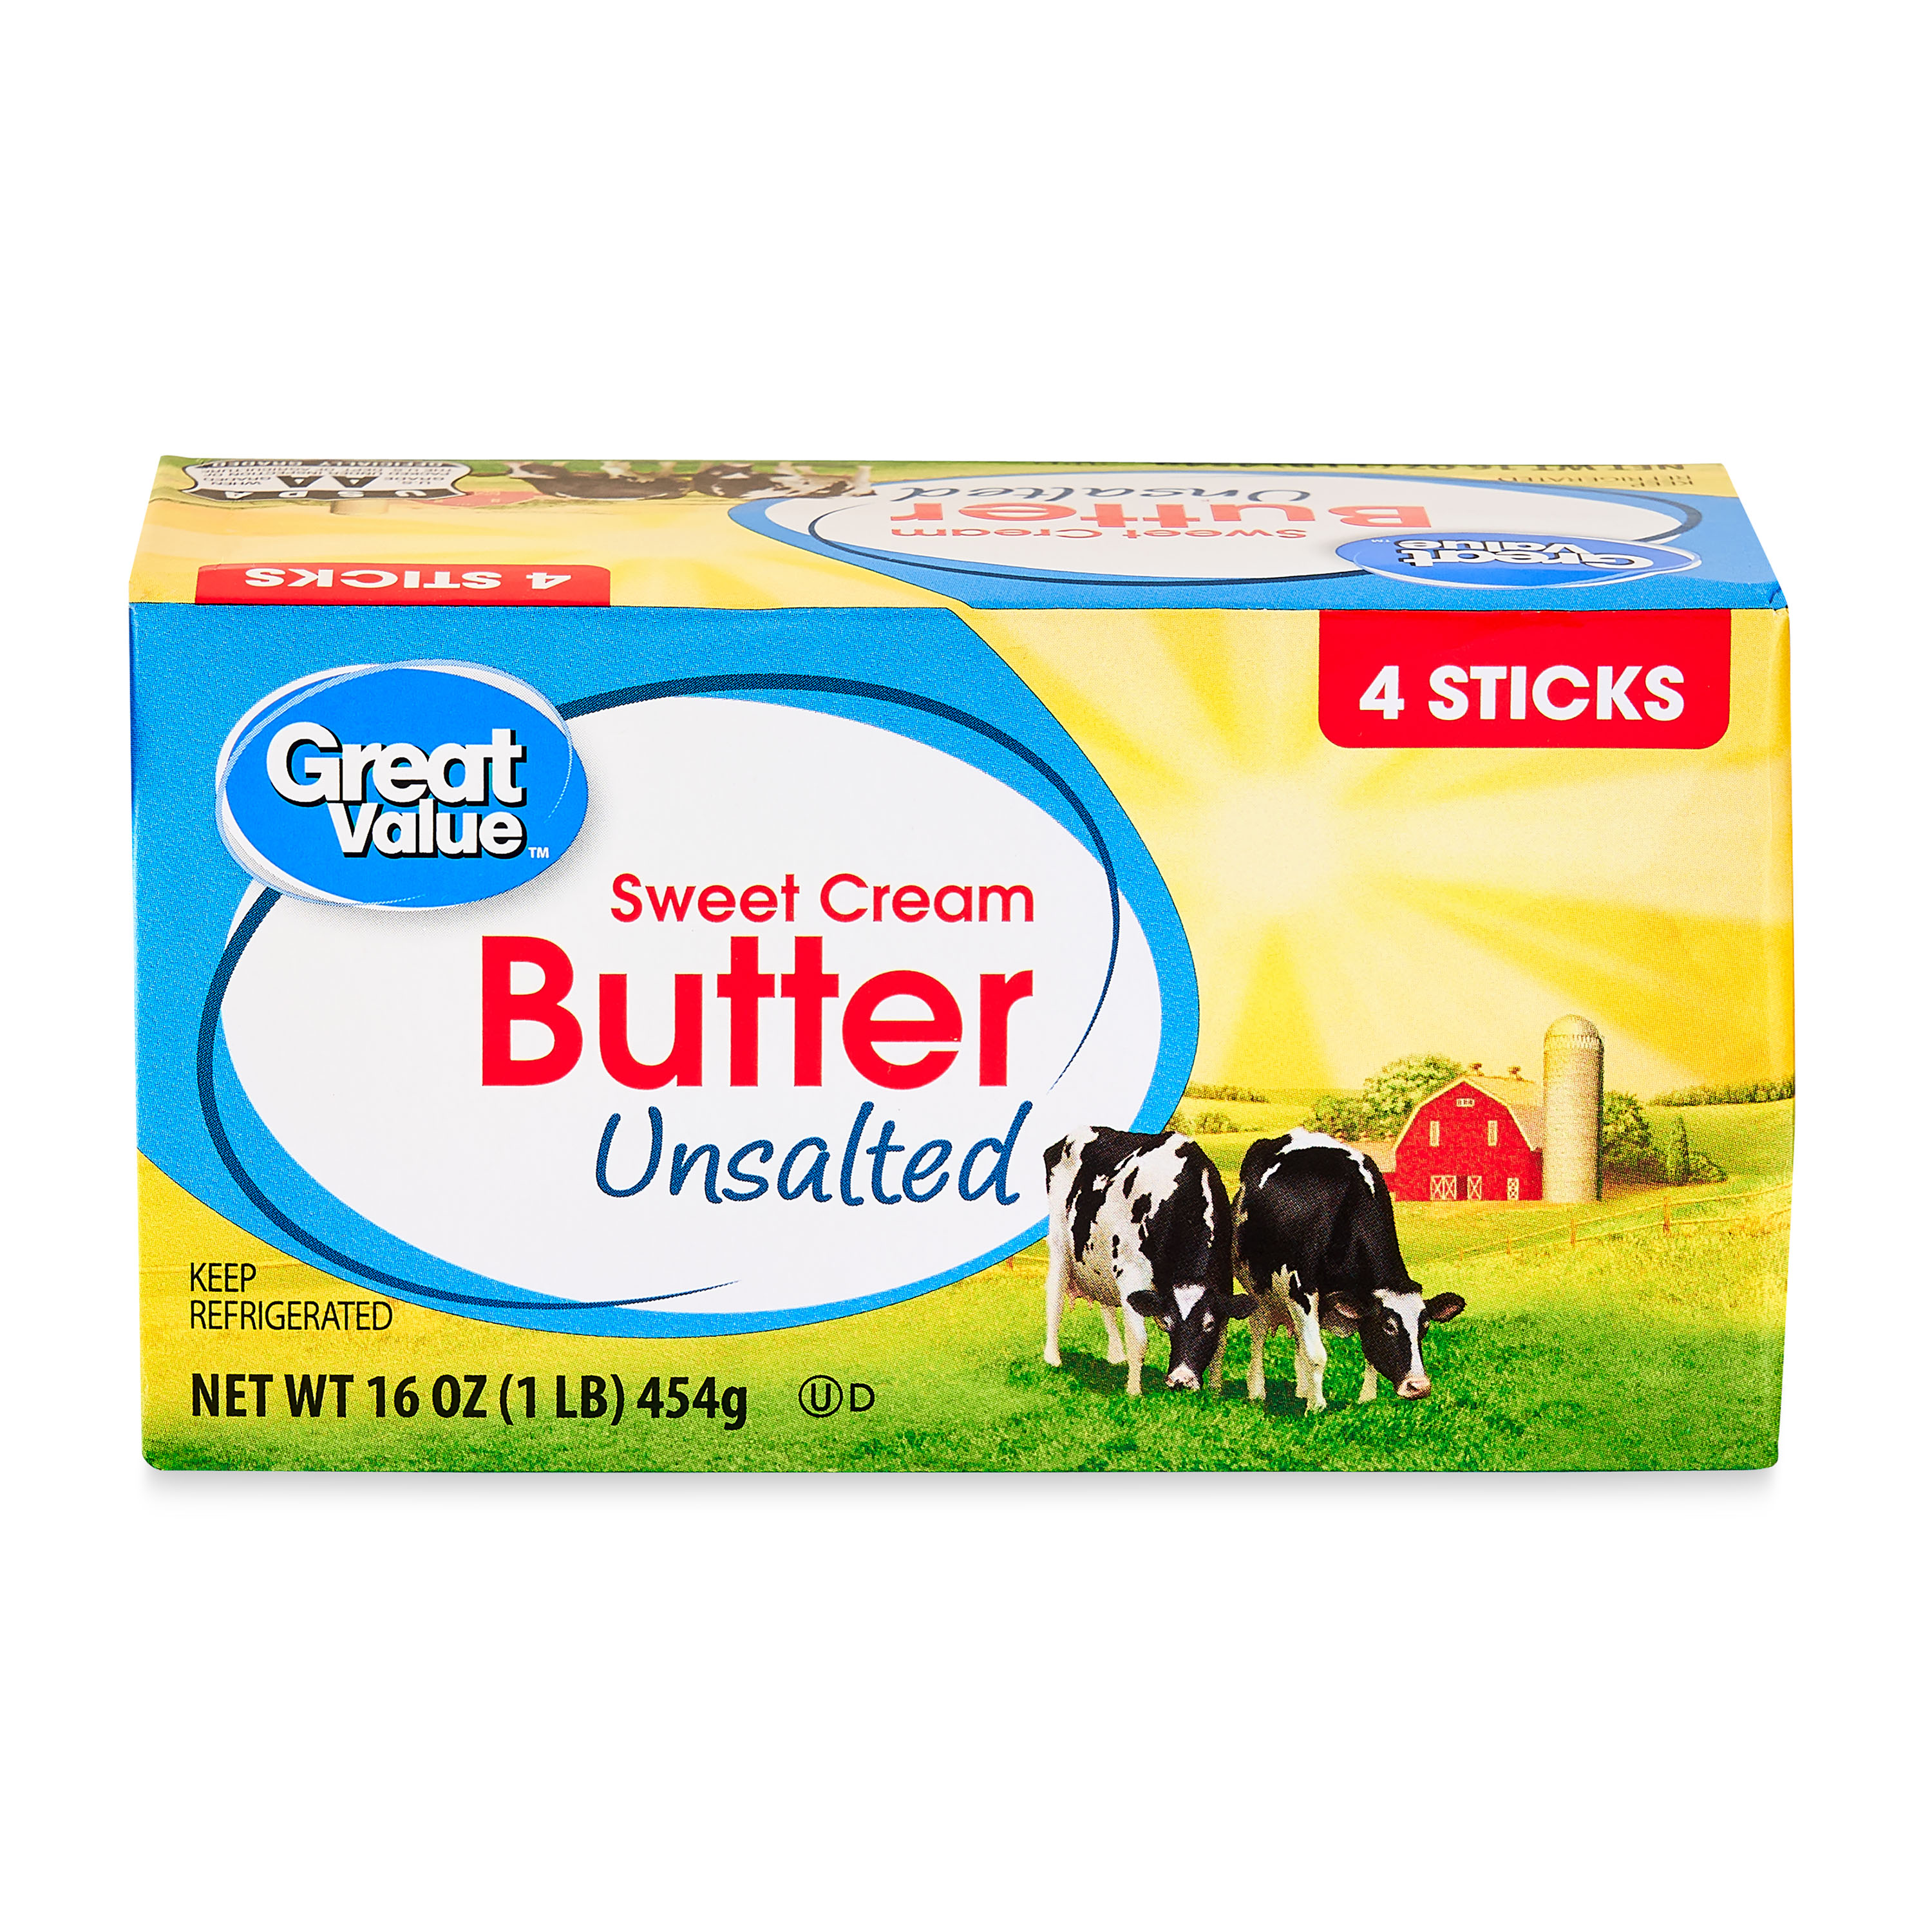 Great Value Sweet Cream Unsalted Butter Sticks, 4 Count,16 oz - image 1 of 7